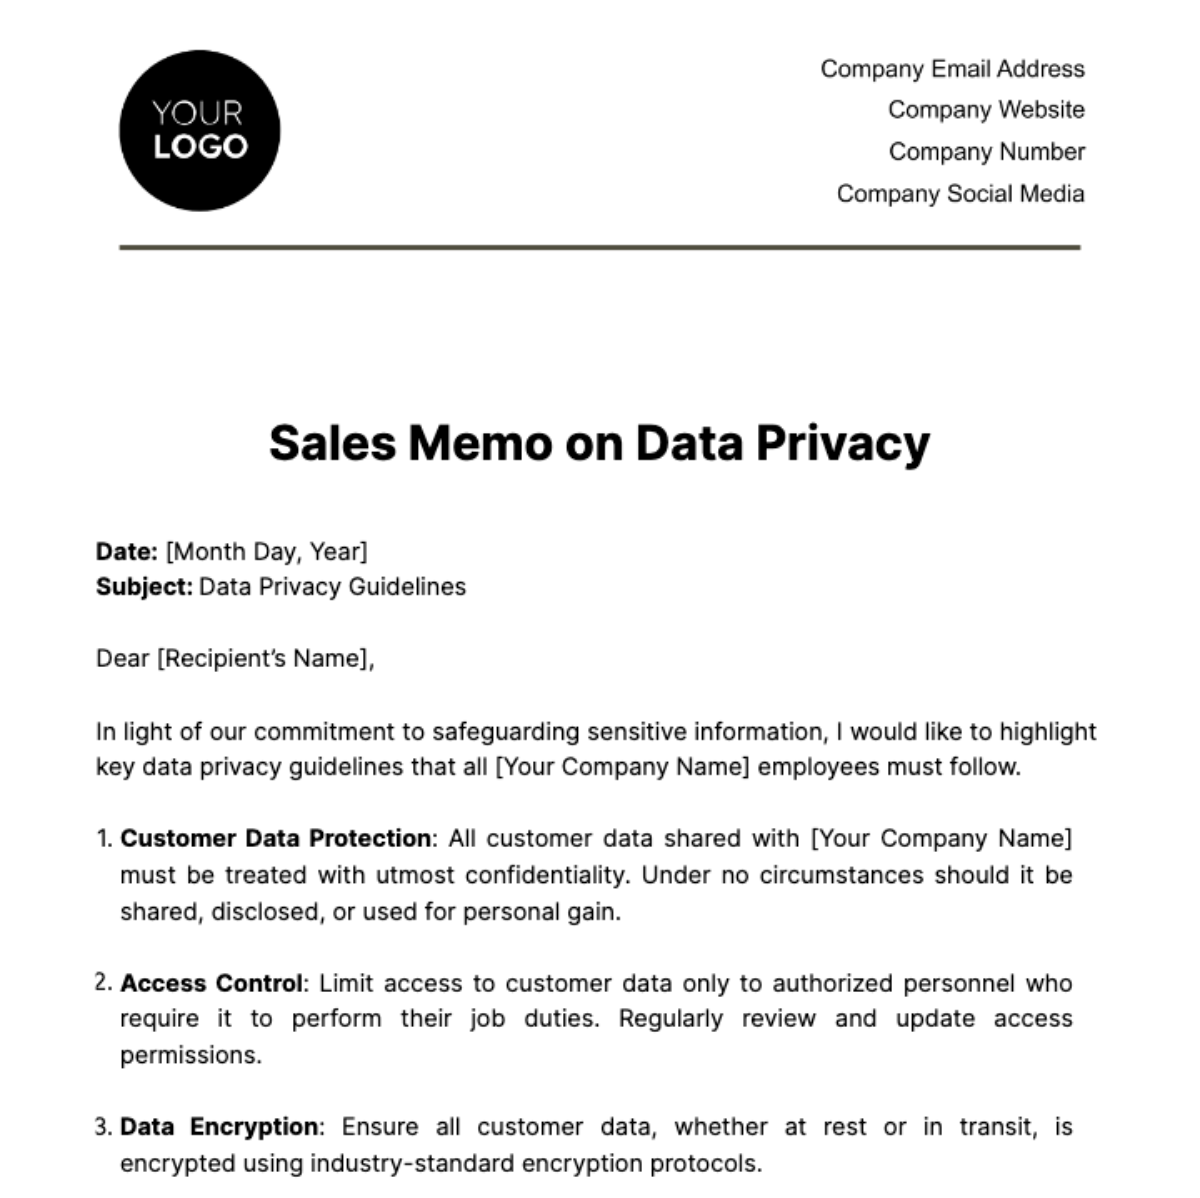 Free Sales Memo on Data Privacy Template